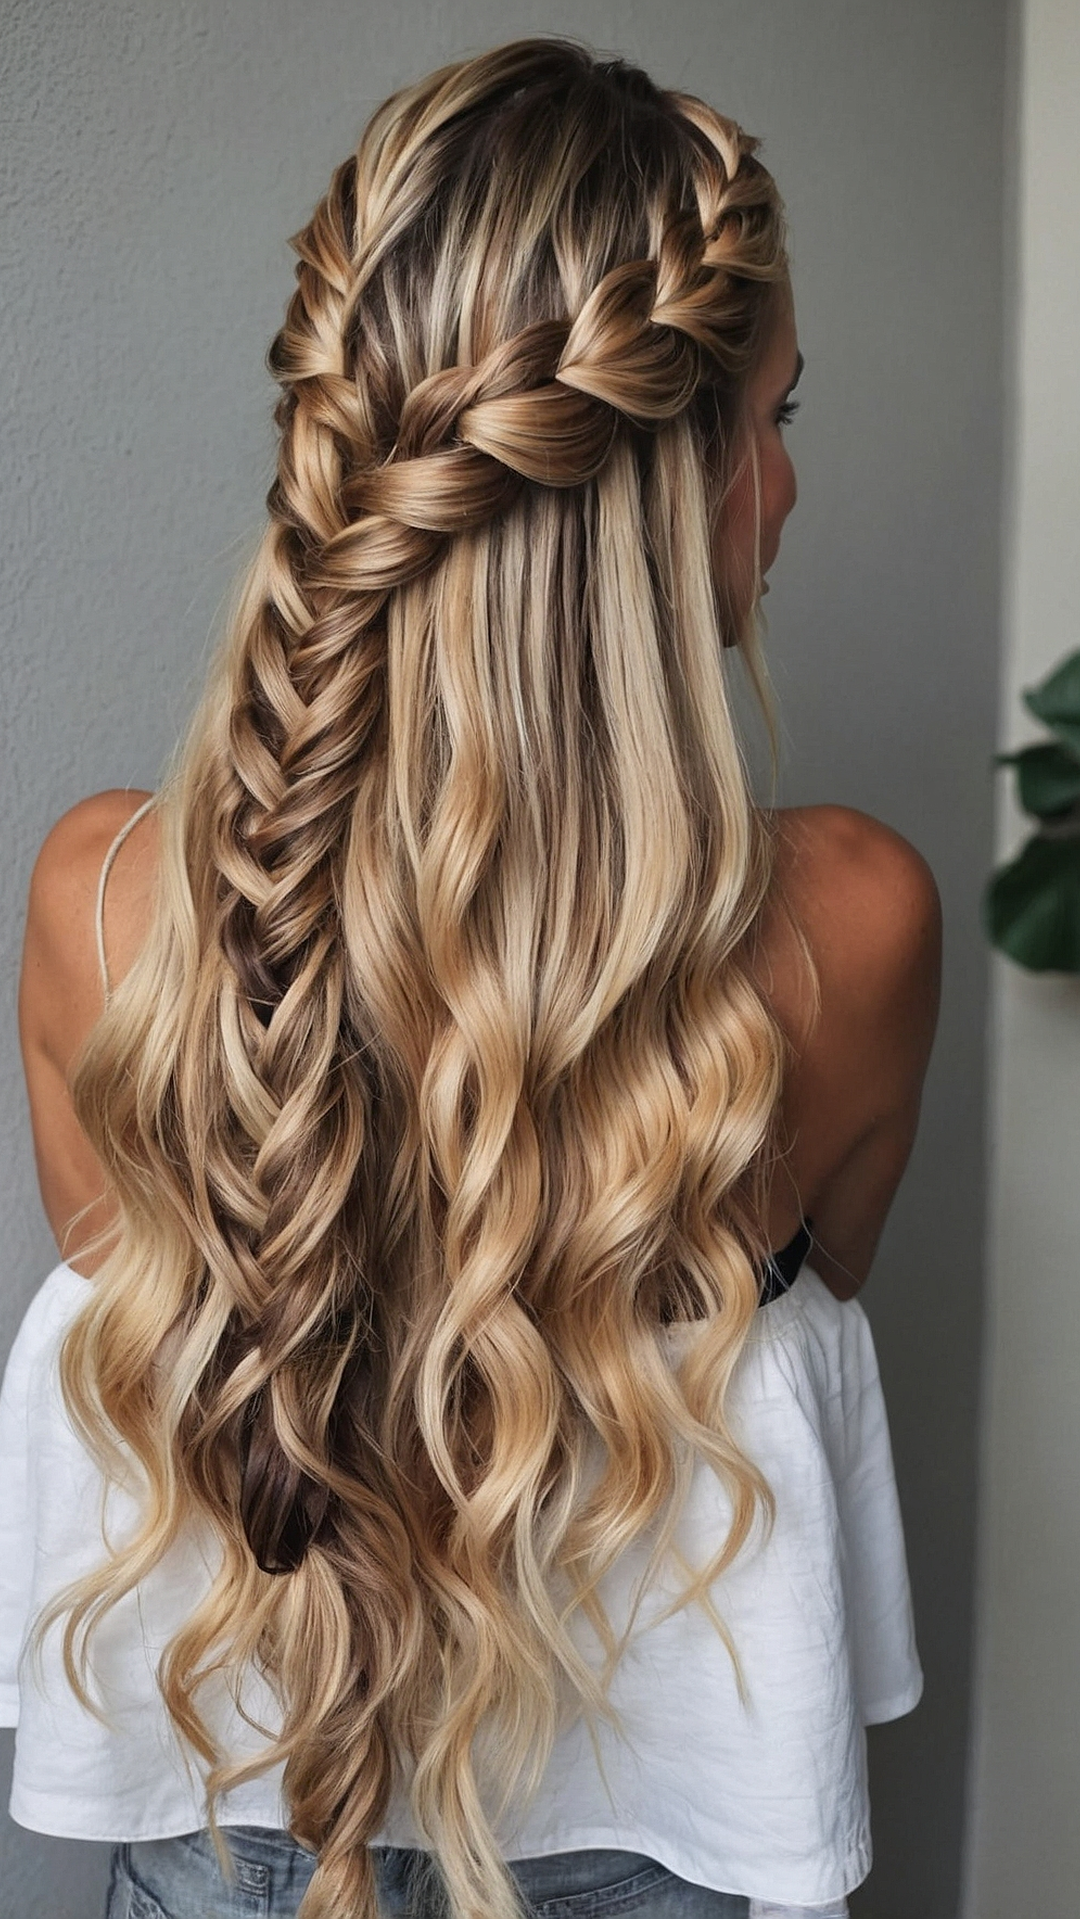 Embrace the Braid: Pretty Hairstyle Inspirations